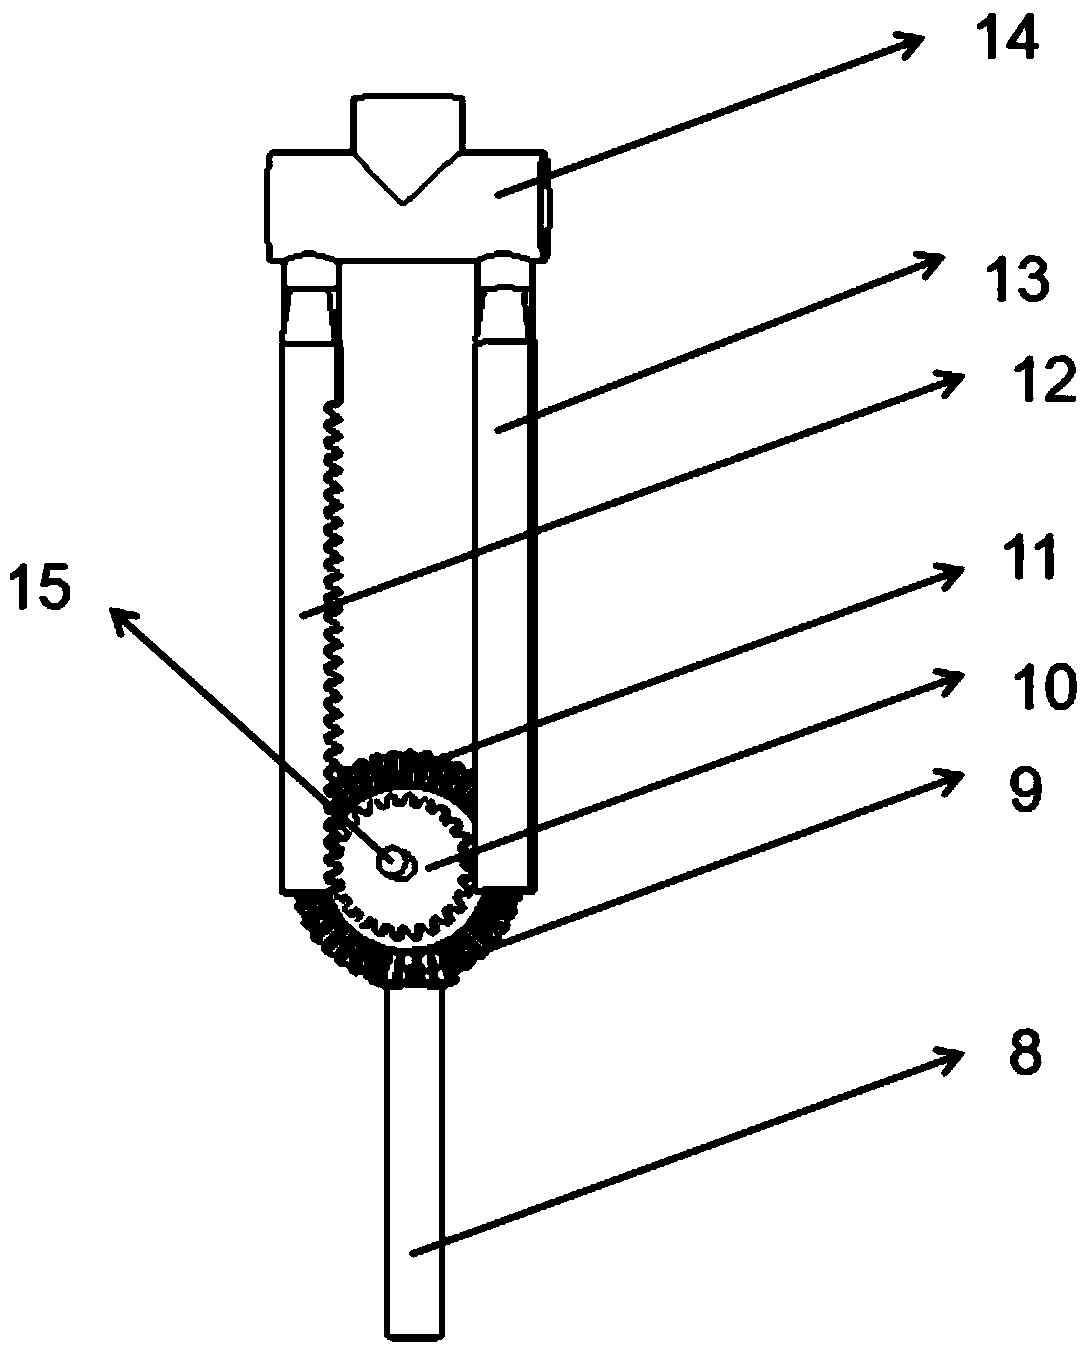 Downhole driven reciprocating pump oil recovery device